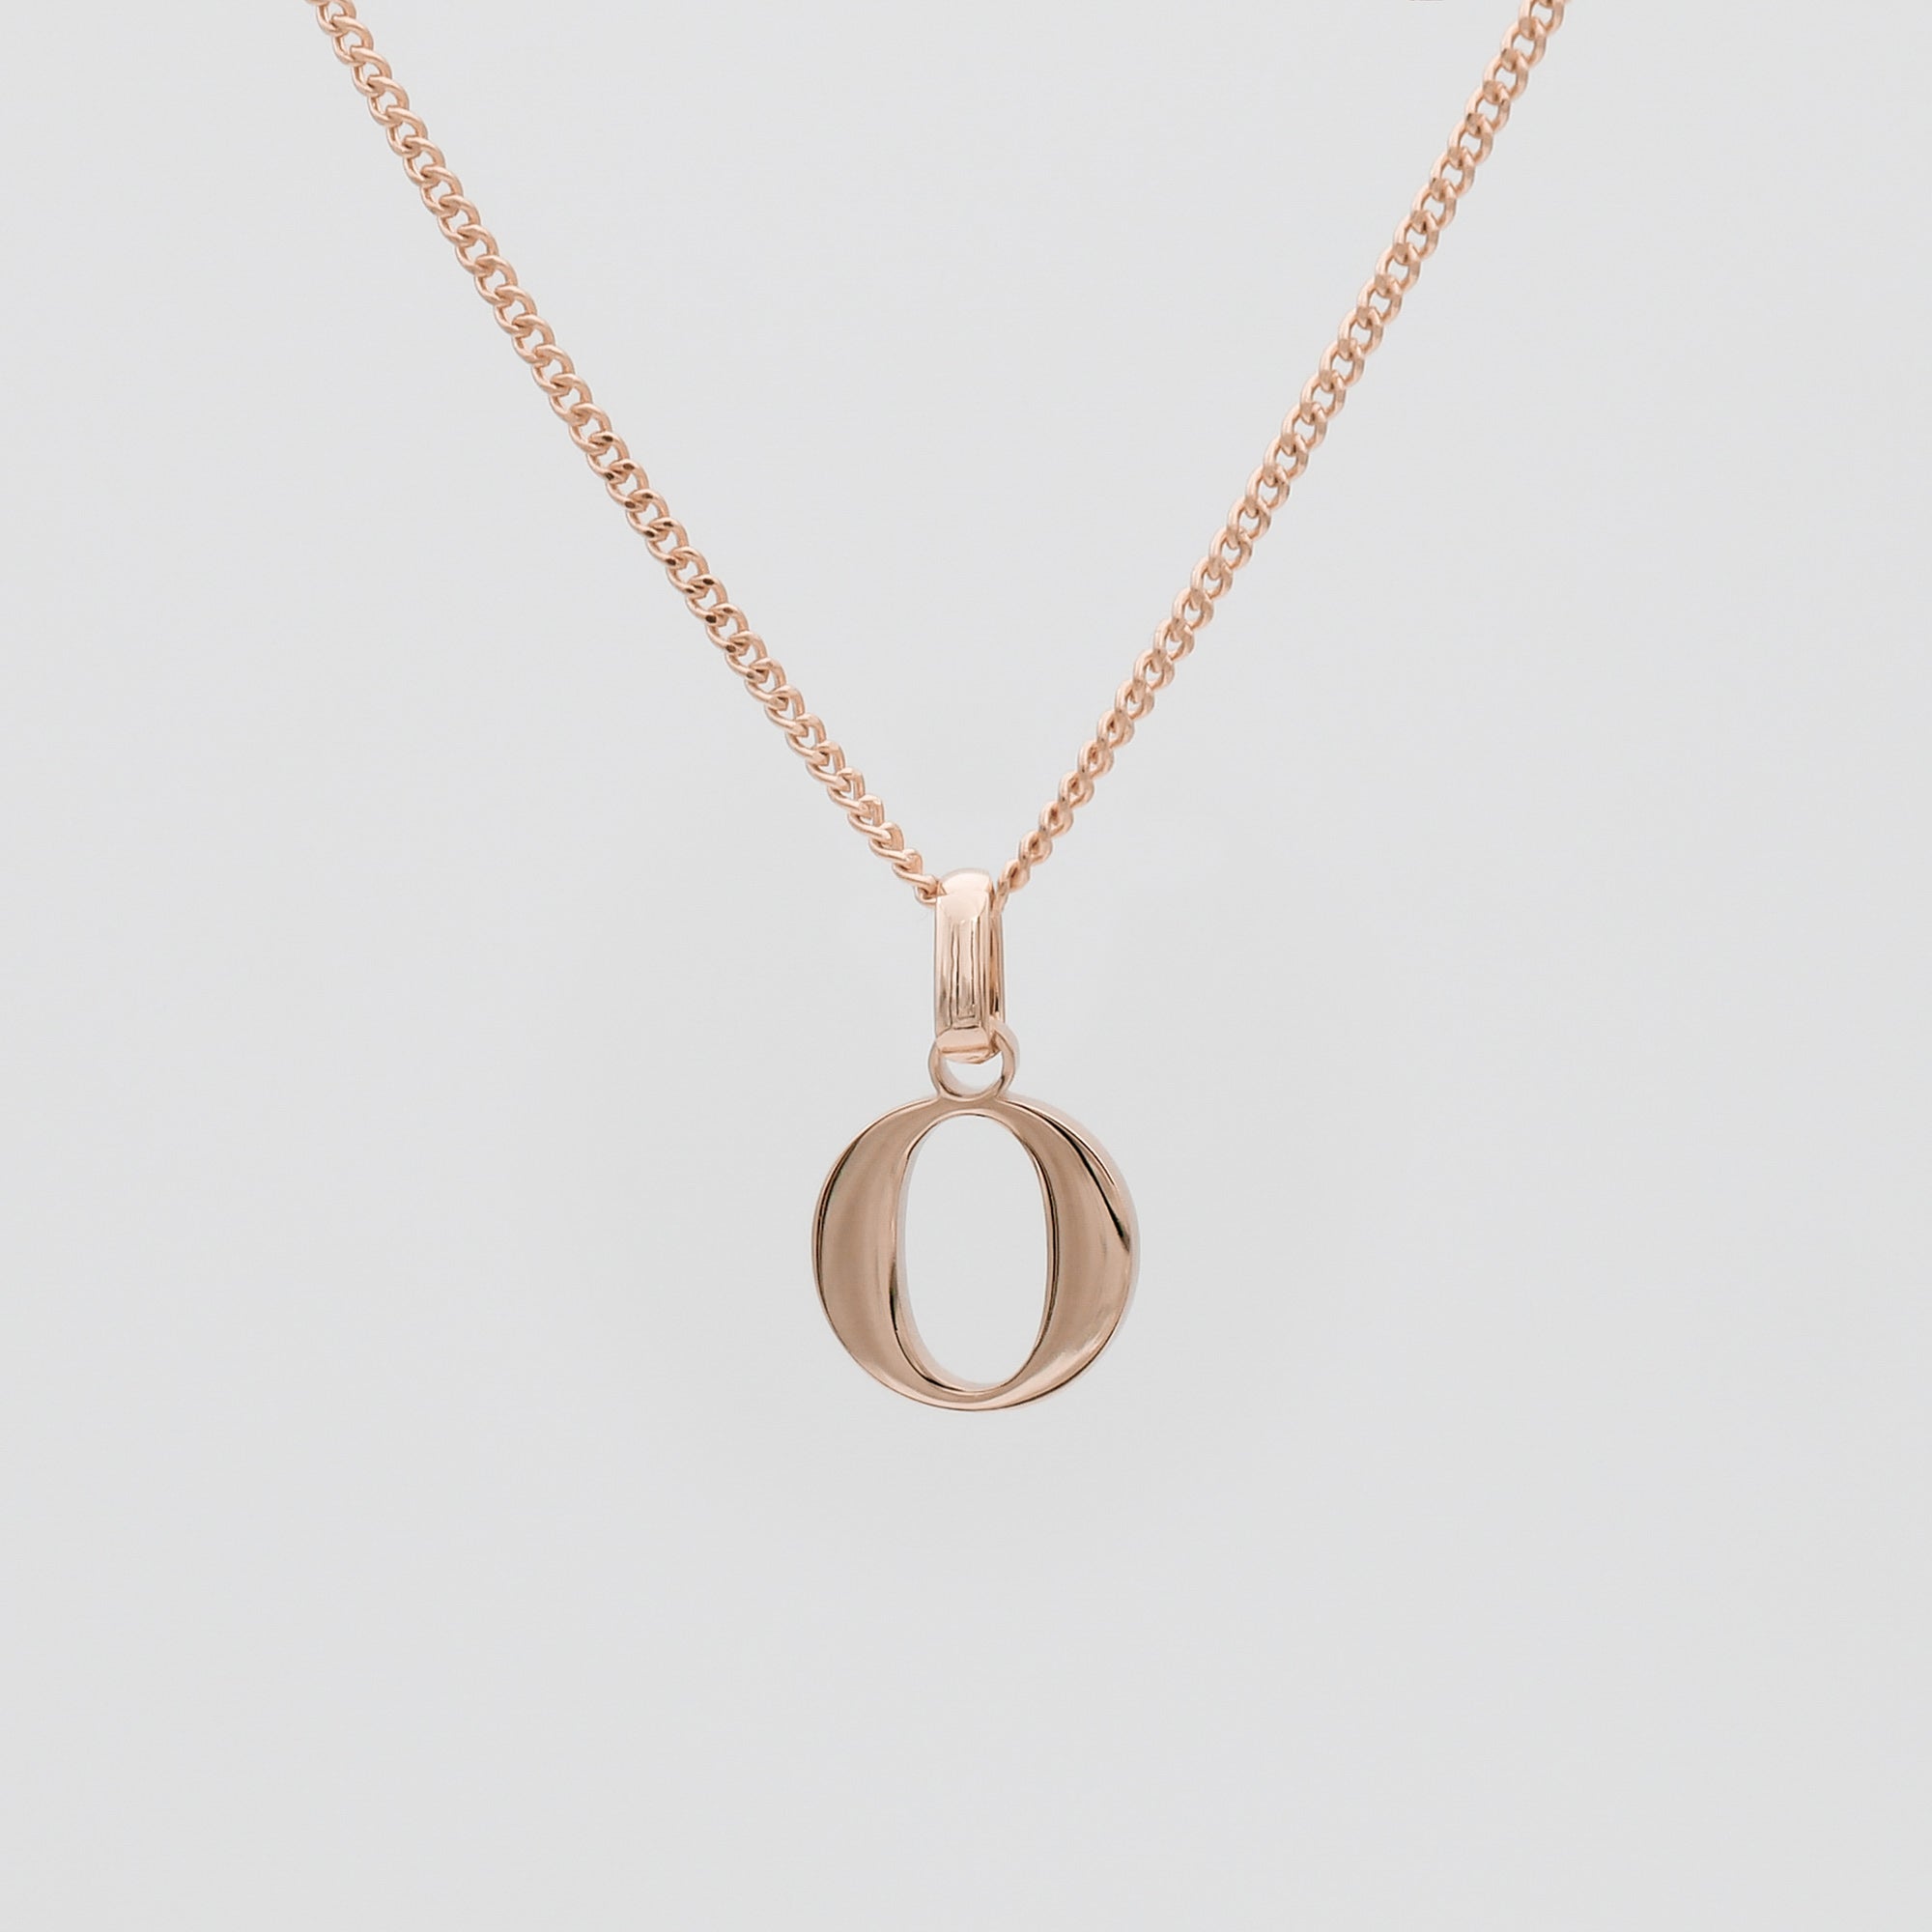 Collier Initiale Kayla 